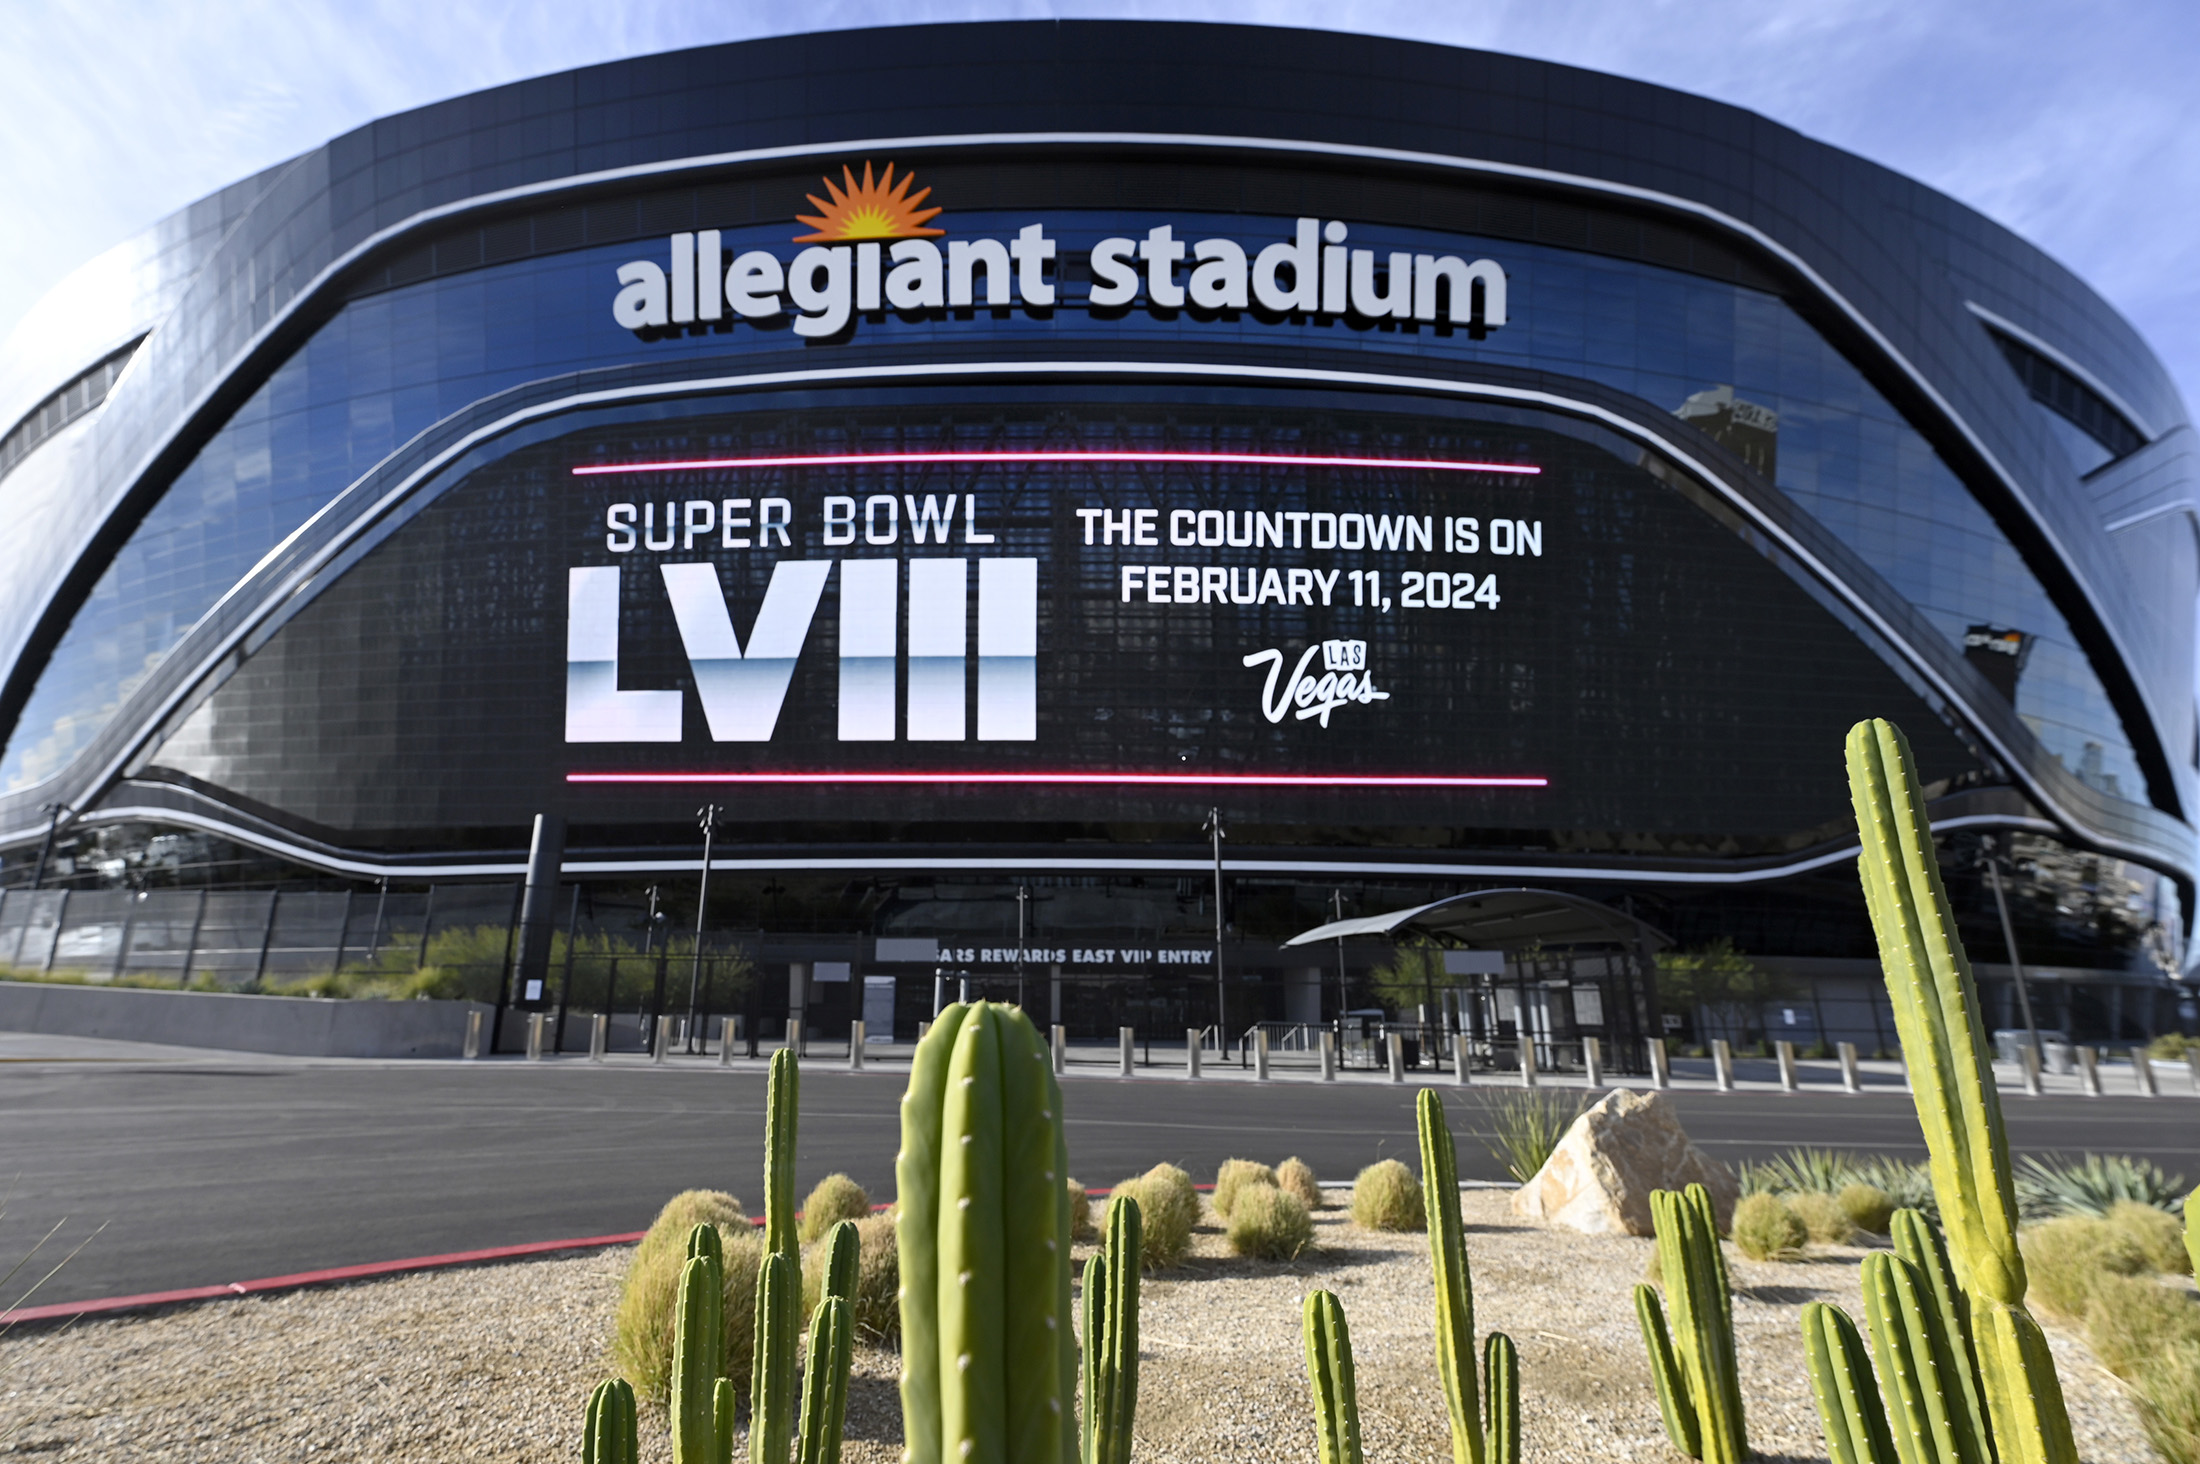 Super Bowl Tickets Chiefs49ers Game in Las Vegas Set Record at 9,800 a Seat Bloomberg